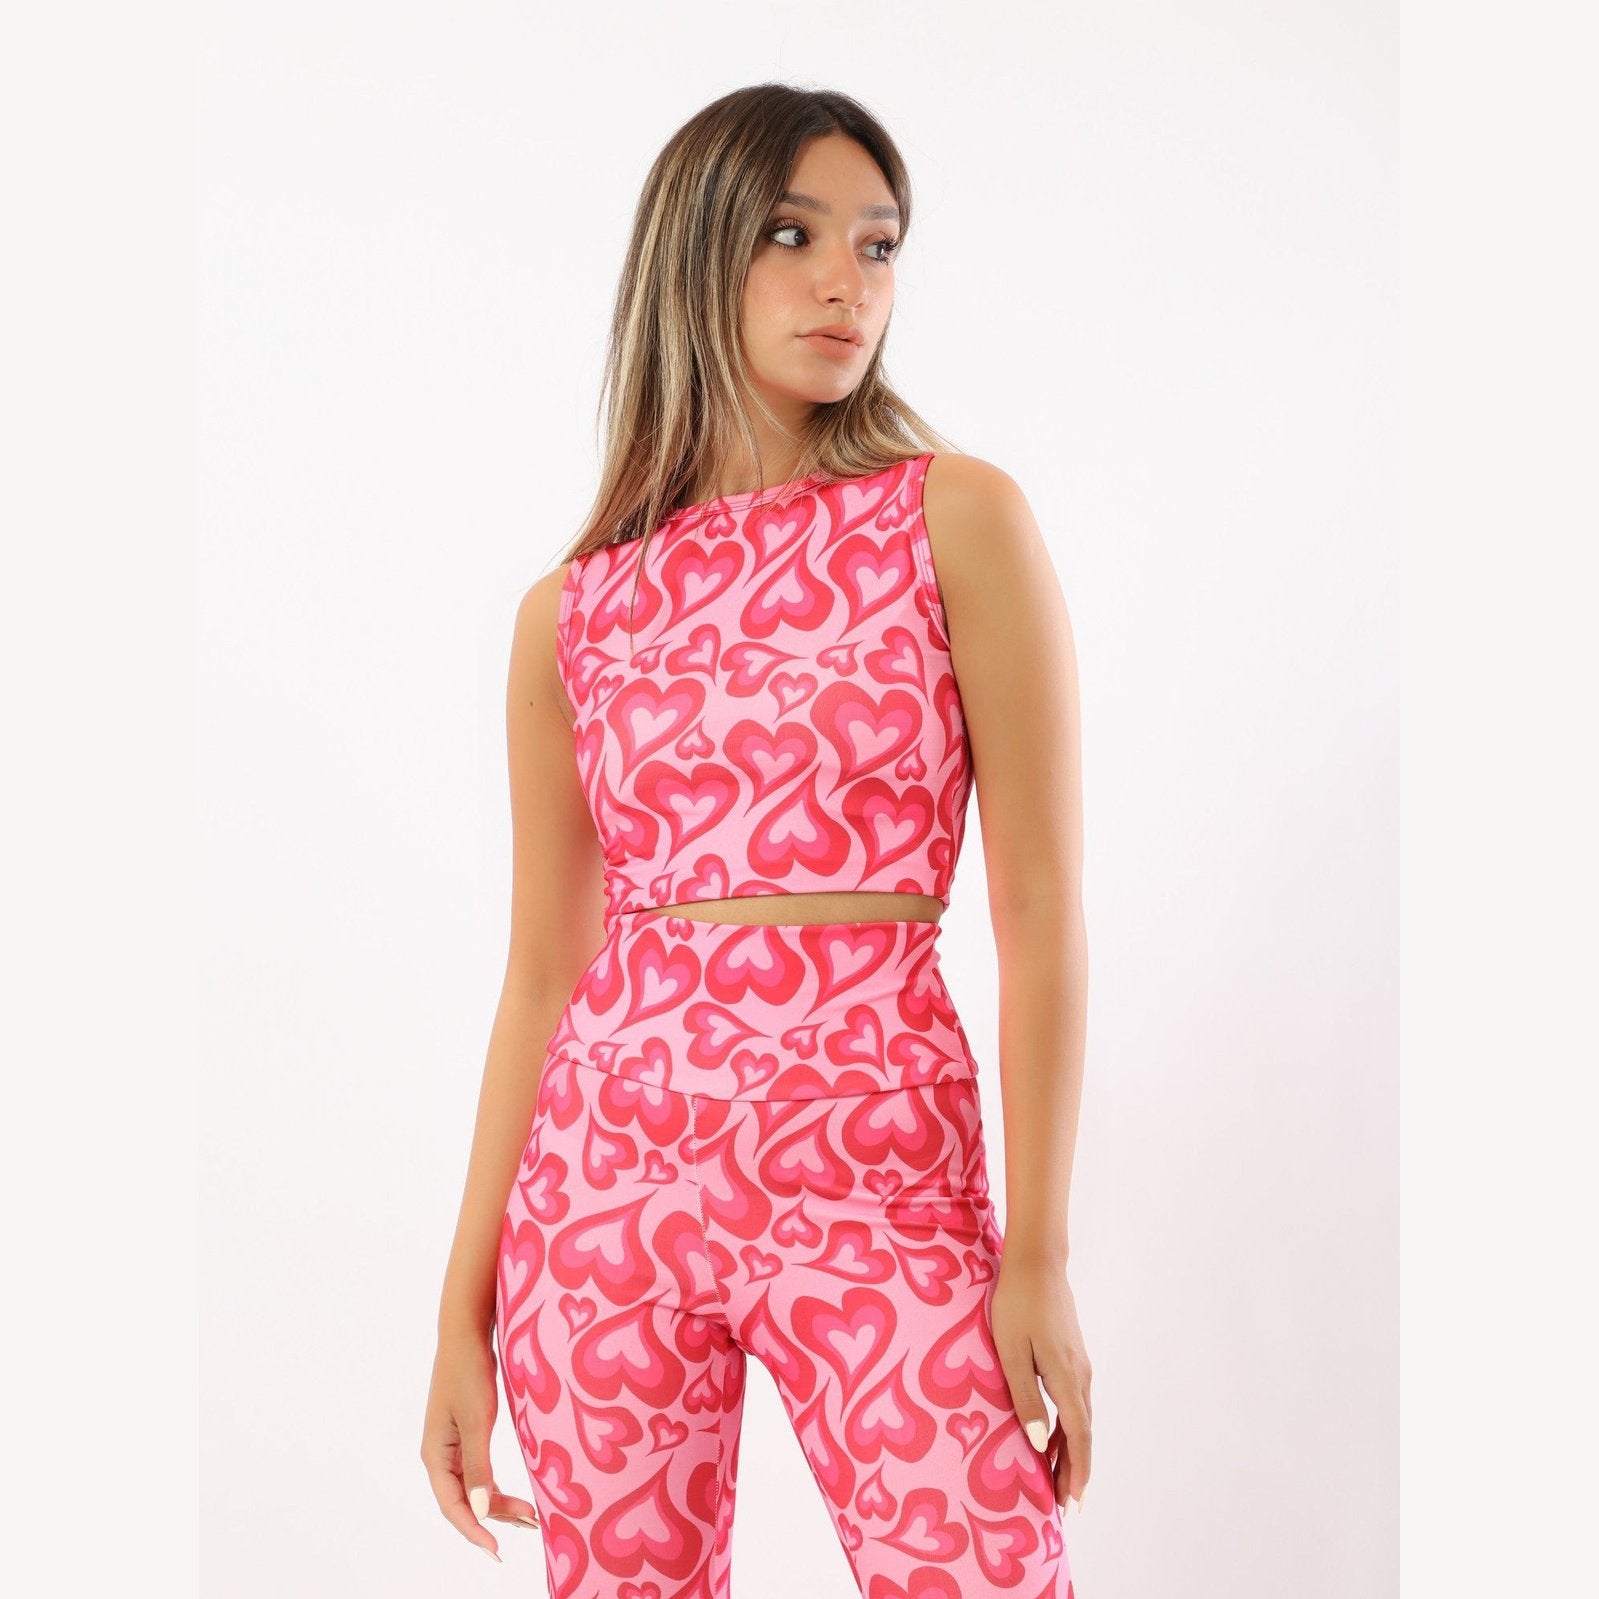 Heart Printed Crop Top - Sporty Pro